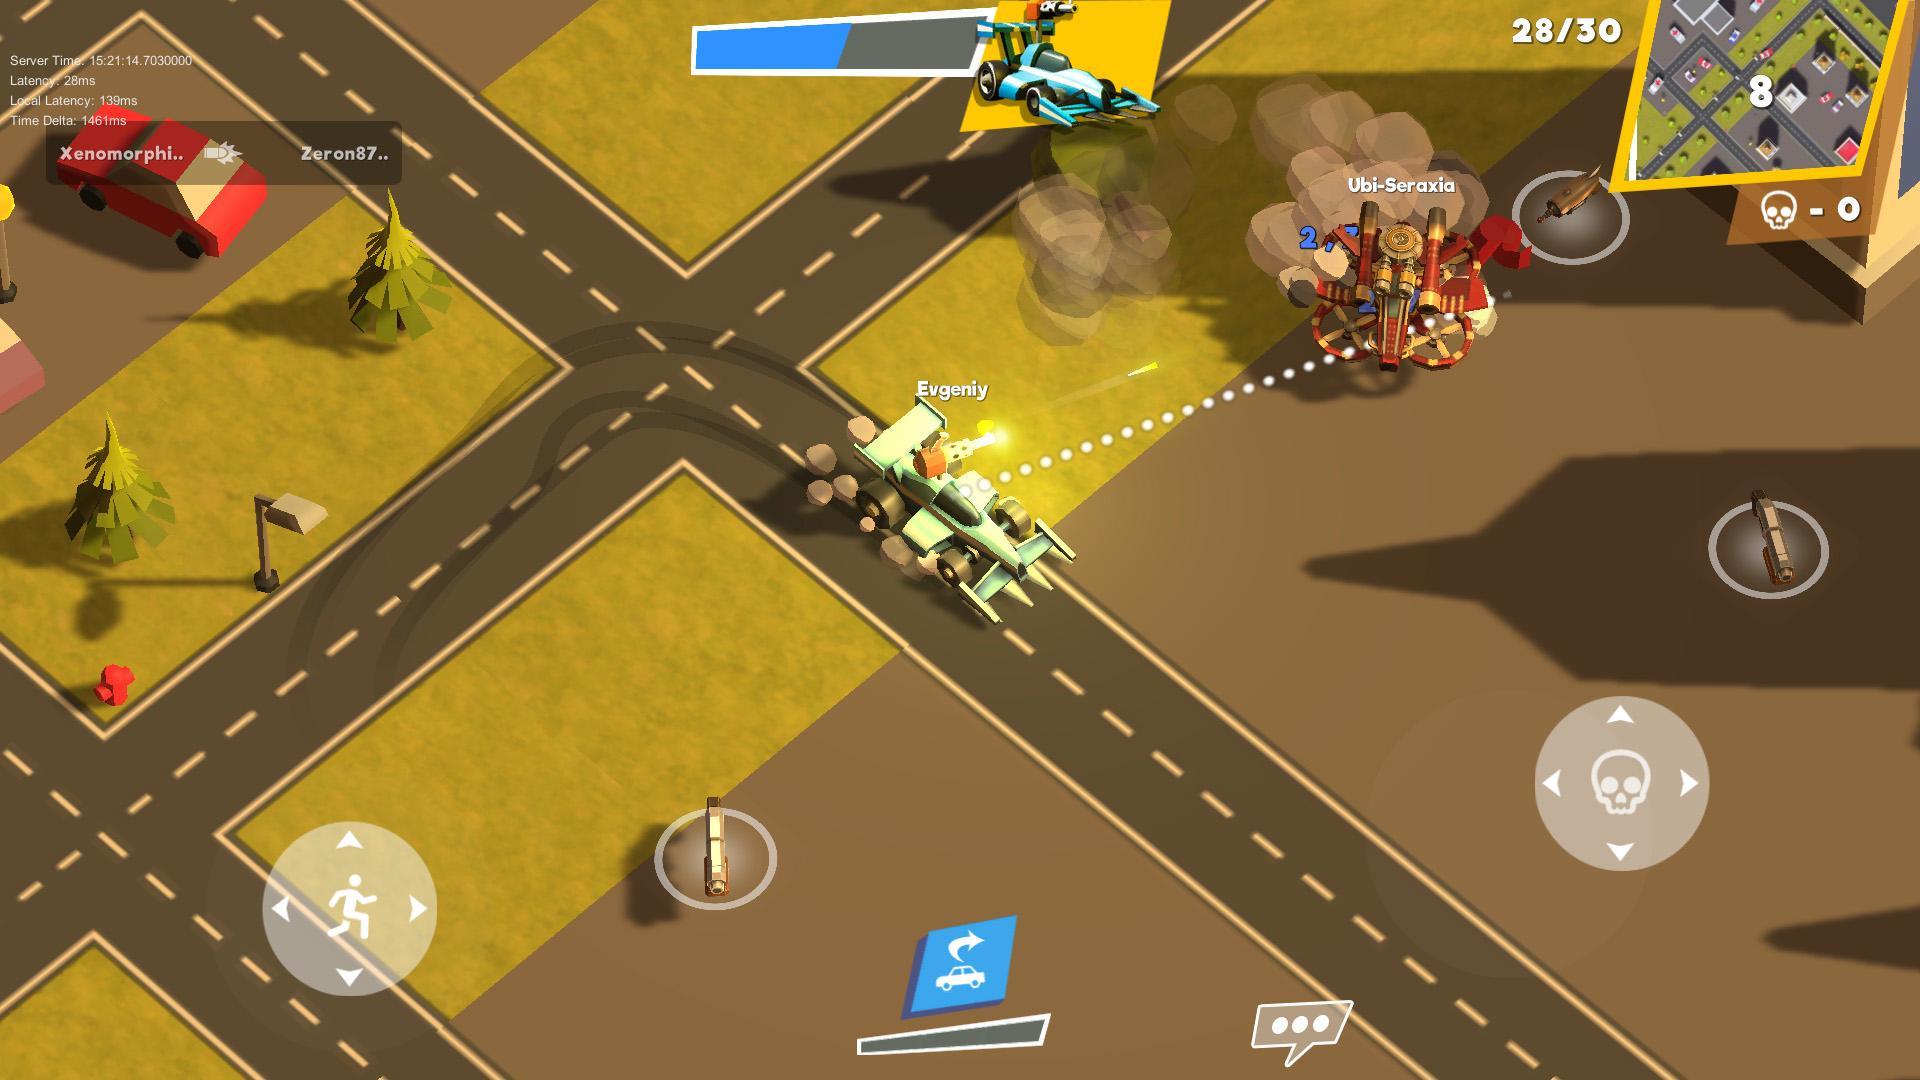 Screenshot 1 of Battle Royale trong Early Access 1.0.42